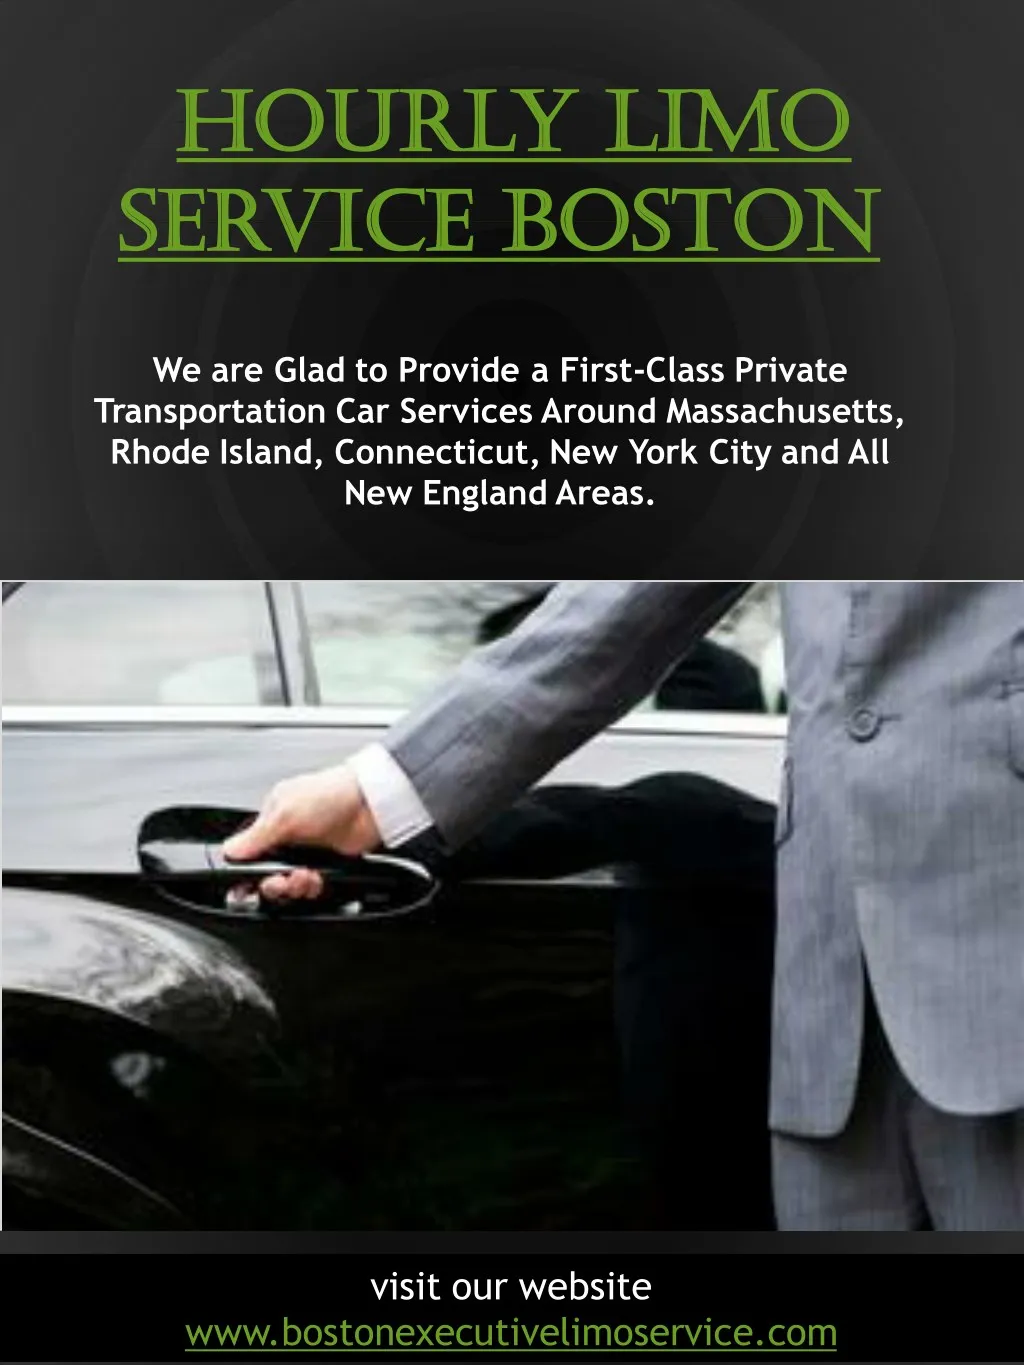 hourly limo hourly limo service boston service